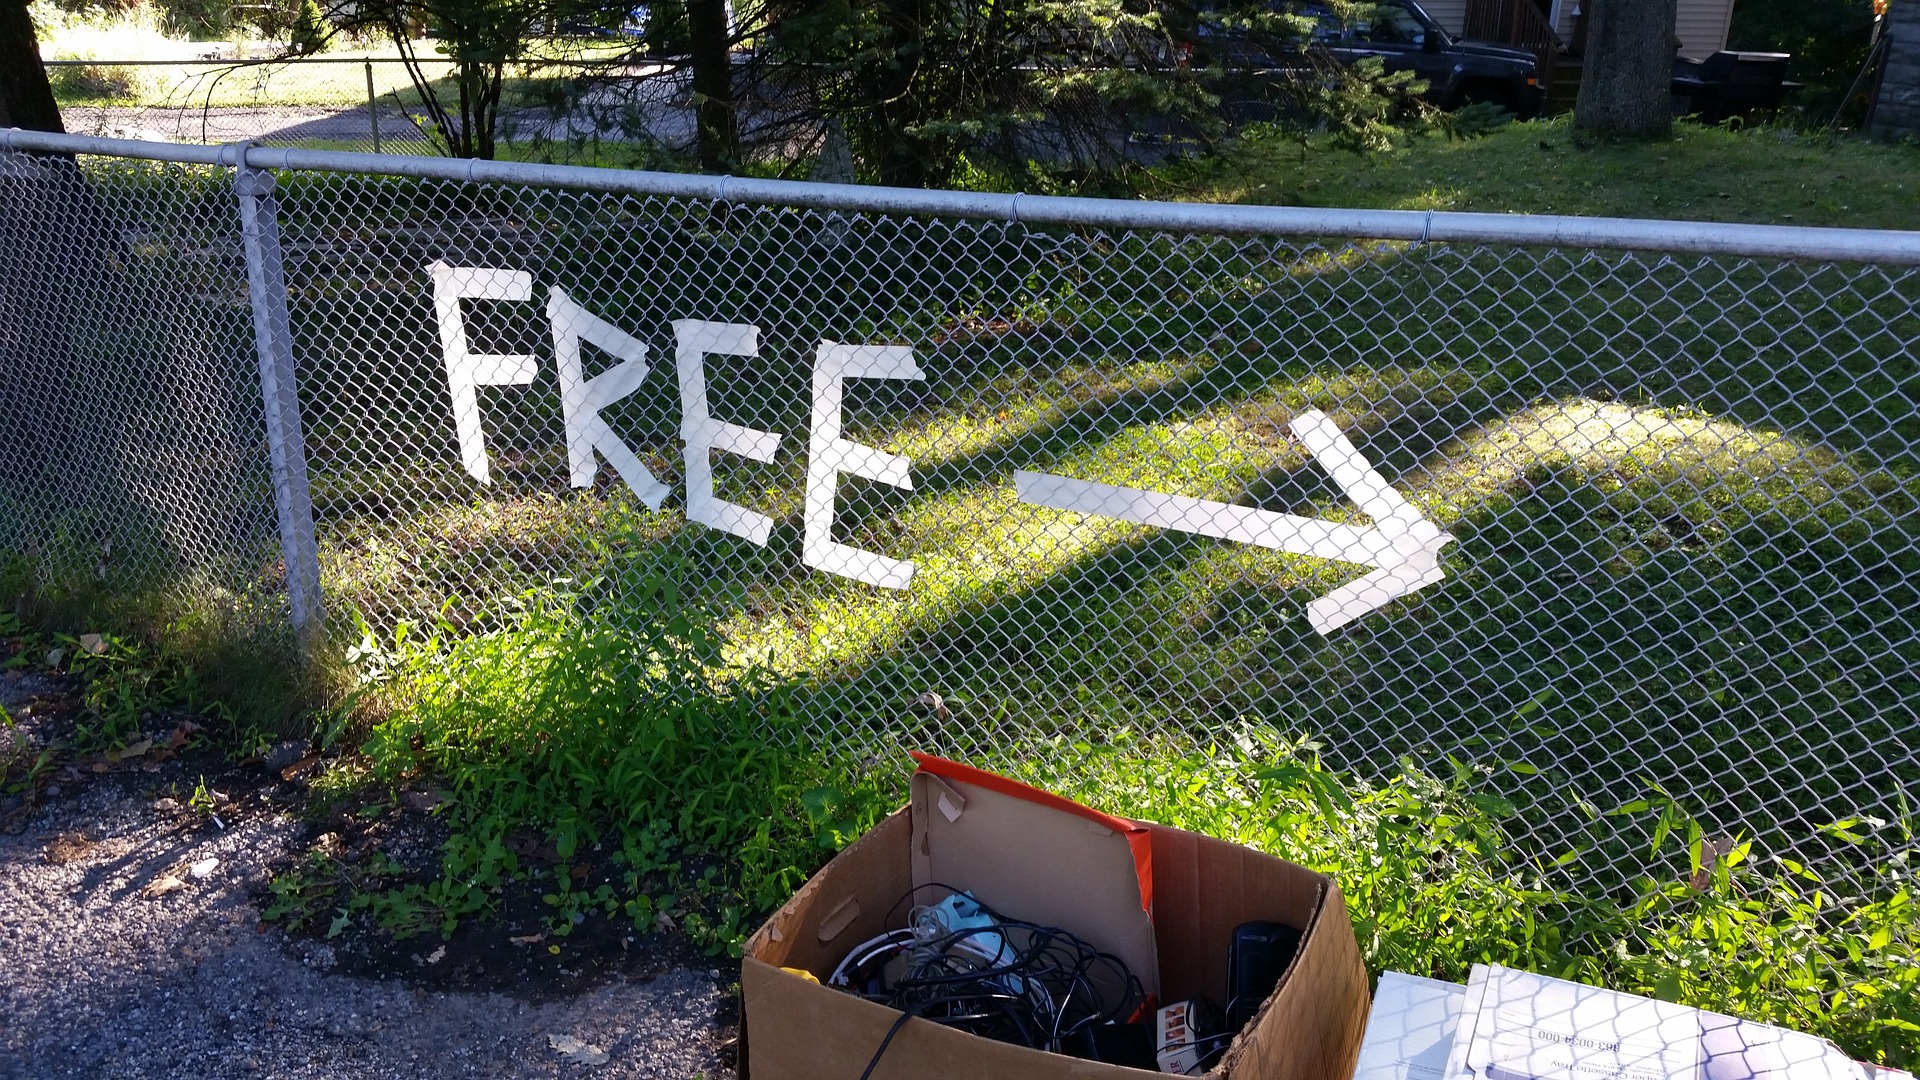 image of left over stuff in a box from a garage sale under a Free sign